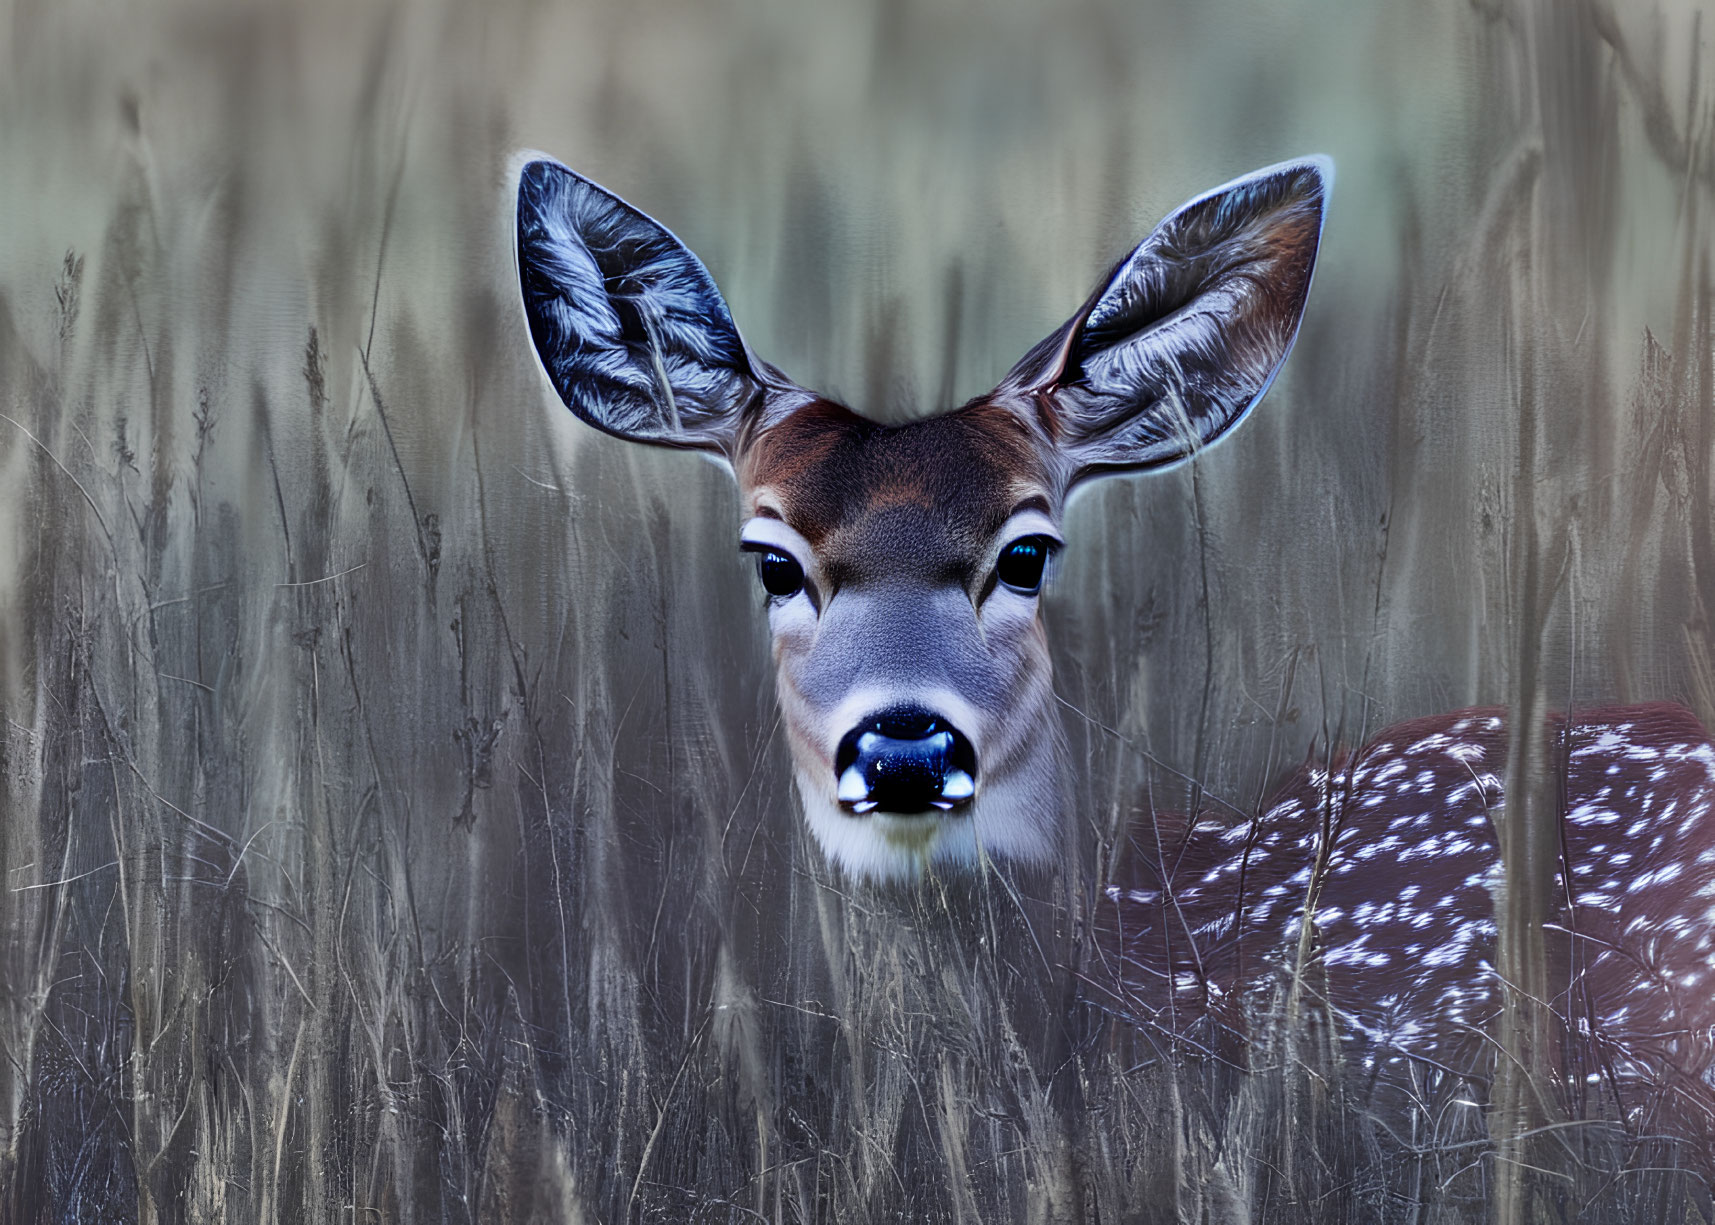 Young deer with white spots blending into tall grass landscape